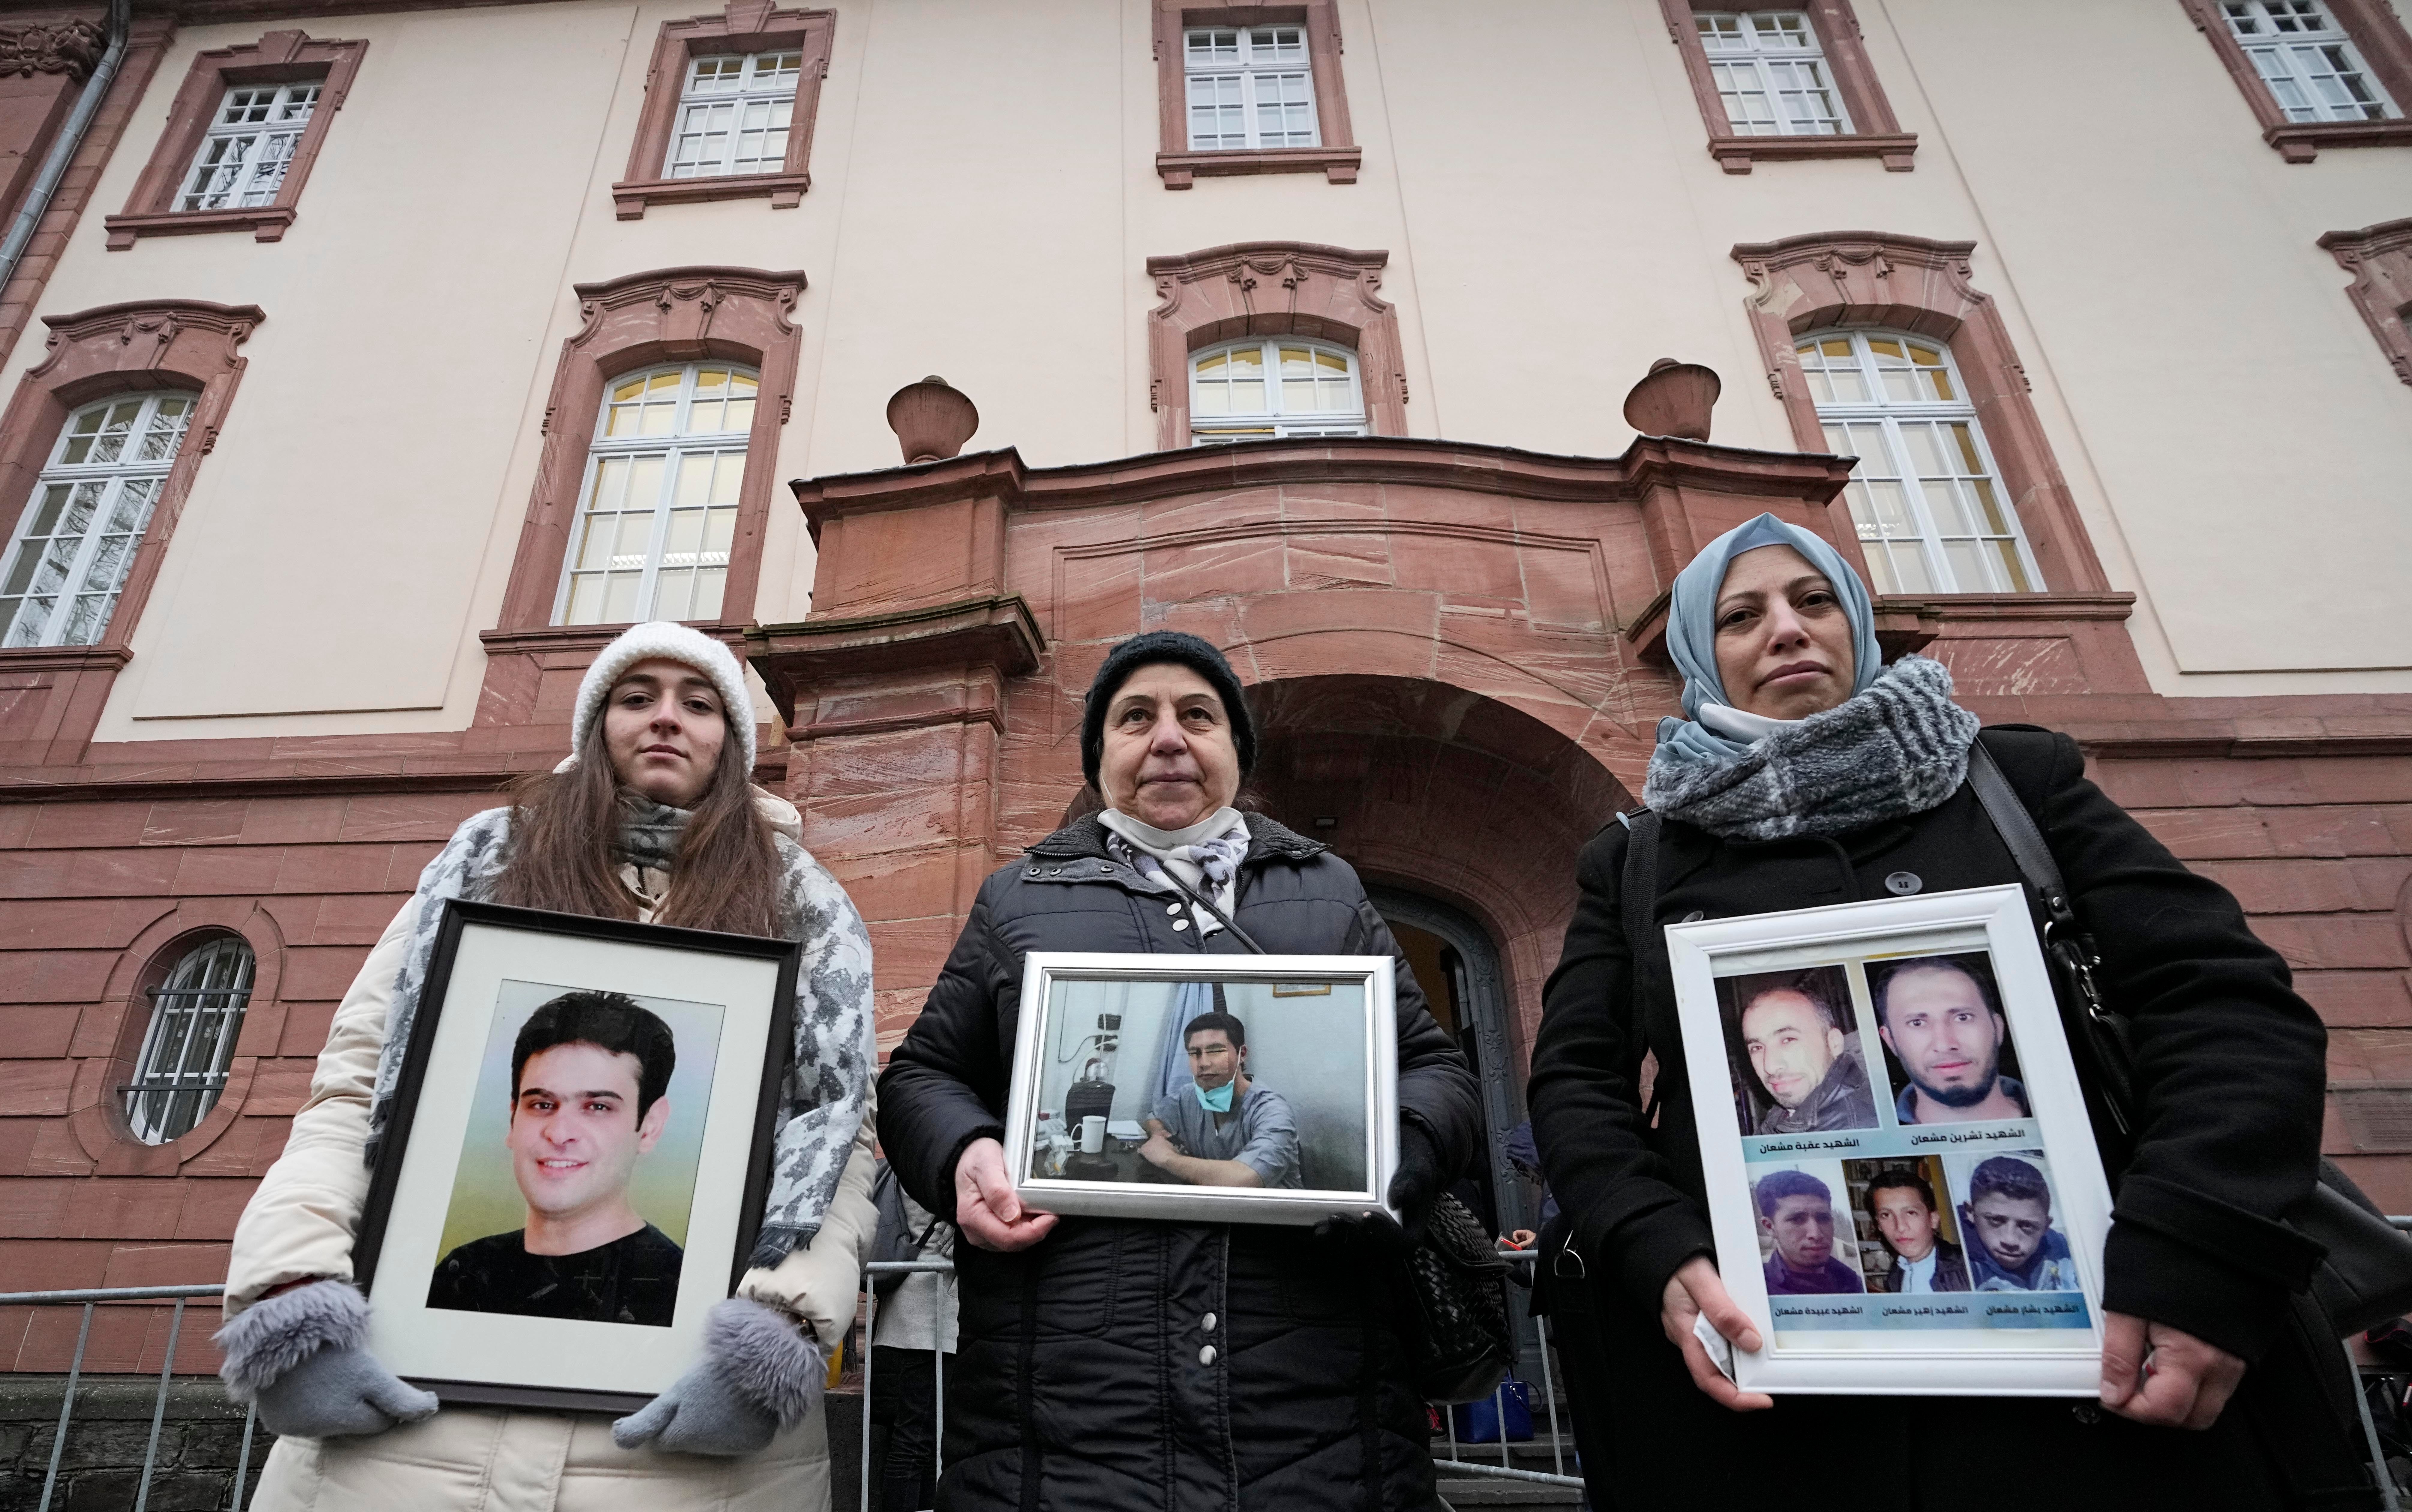 Syrian women Samaa Mahmoud, Mariam Alhallak and Yasmen Almashan hold pictures of relatives who died in Syria, before the verdict in front of the court in Koblenz, Germany